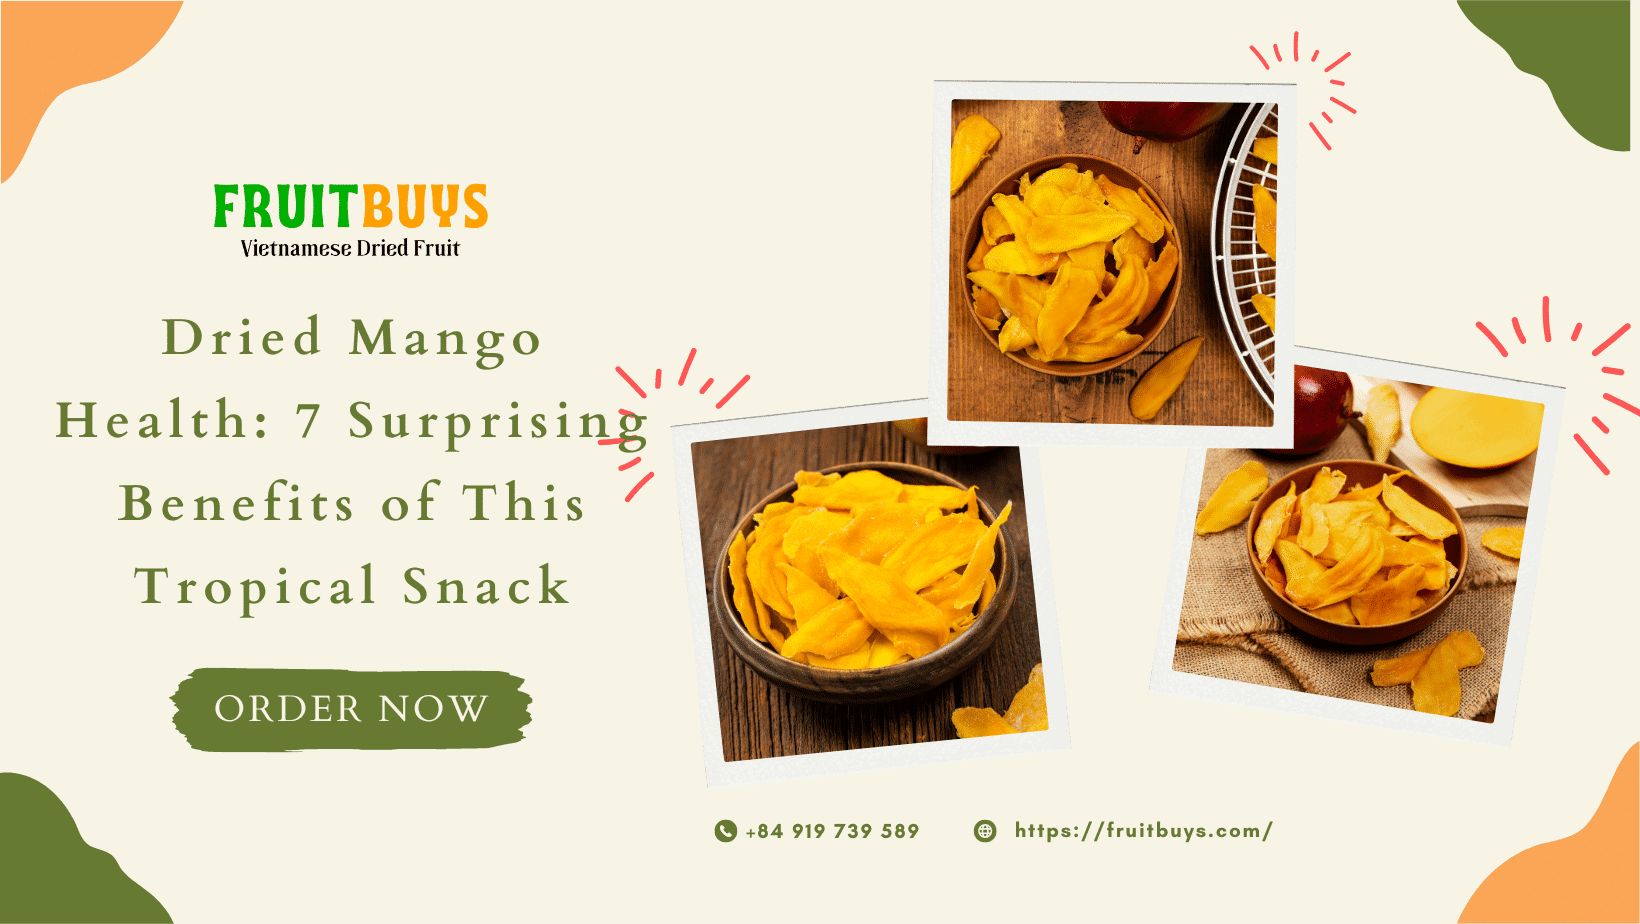 FruitBuys Vietnam  Dried Mango Health 7 Surprising Benefits Of This Tropical Snack